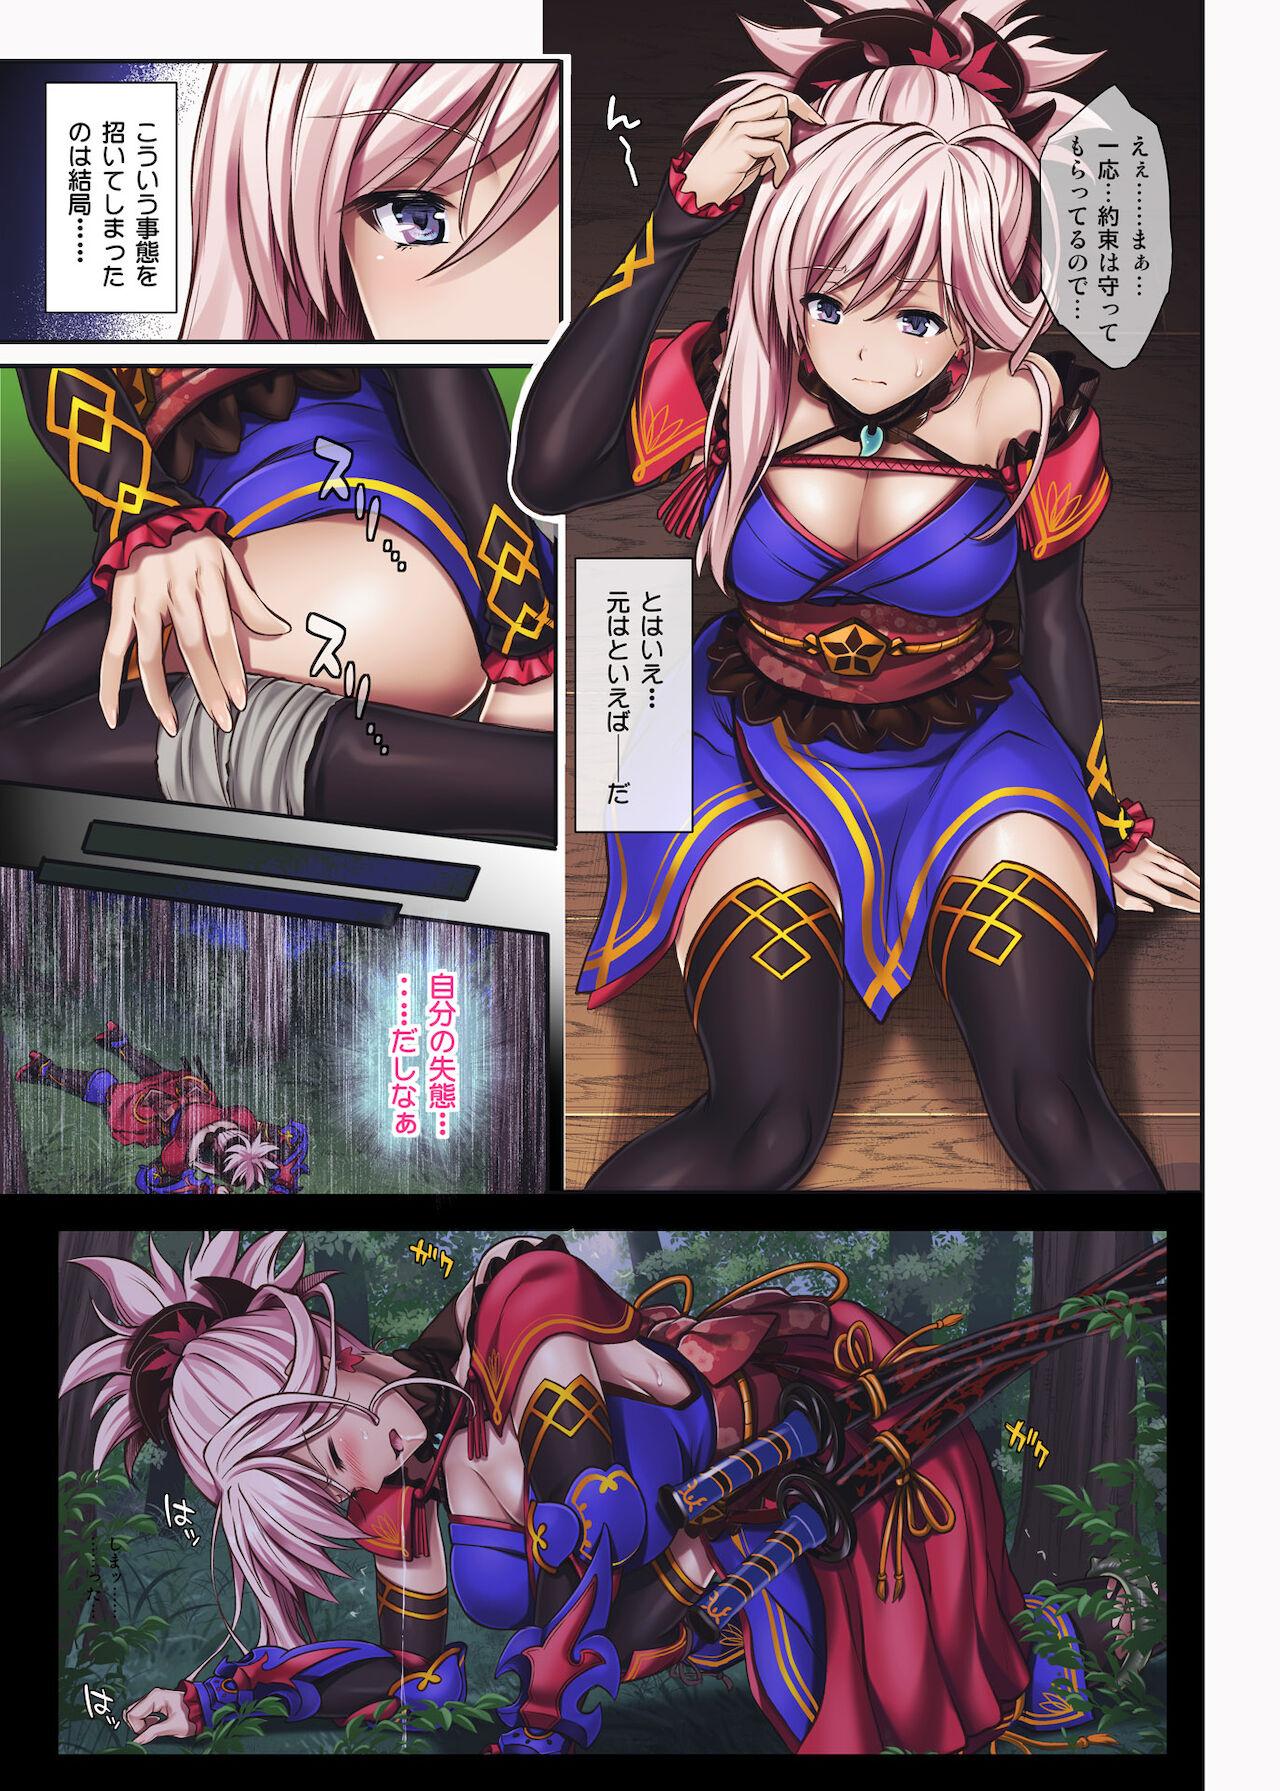 Teenporn Cyclone no Doujinshi Full Color Pack 4 - Fate grand order Fucks - Page 6